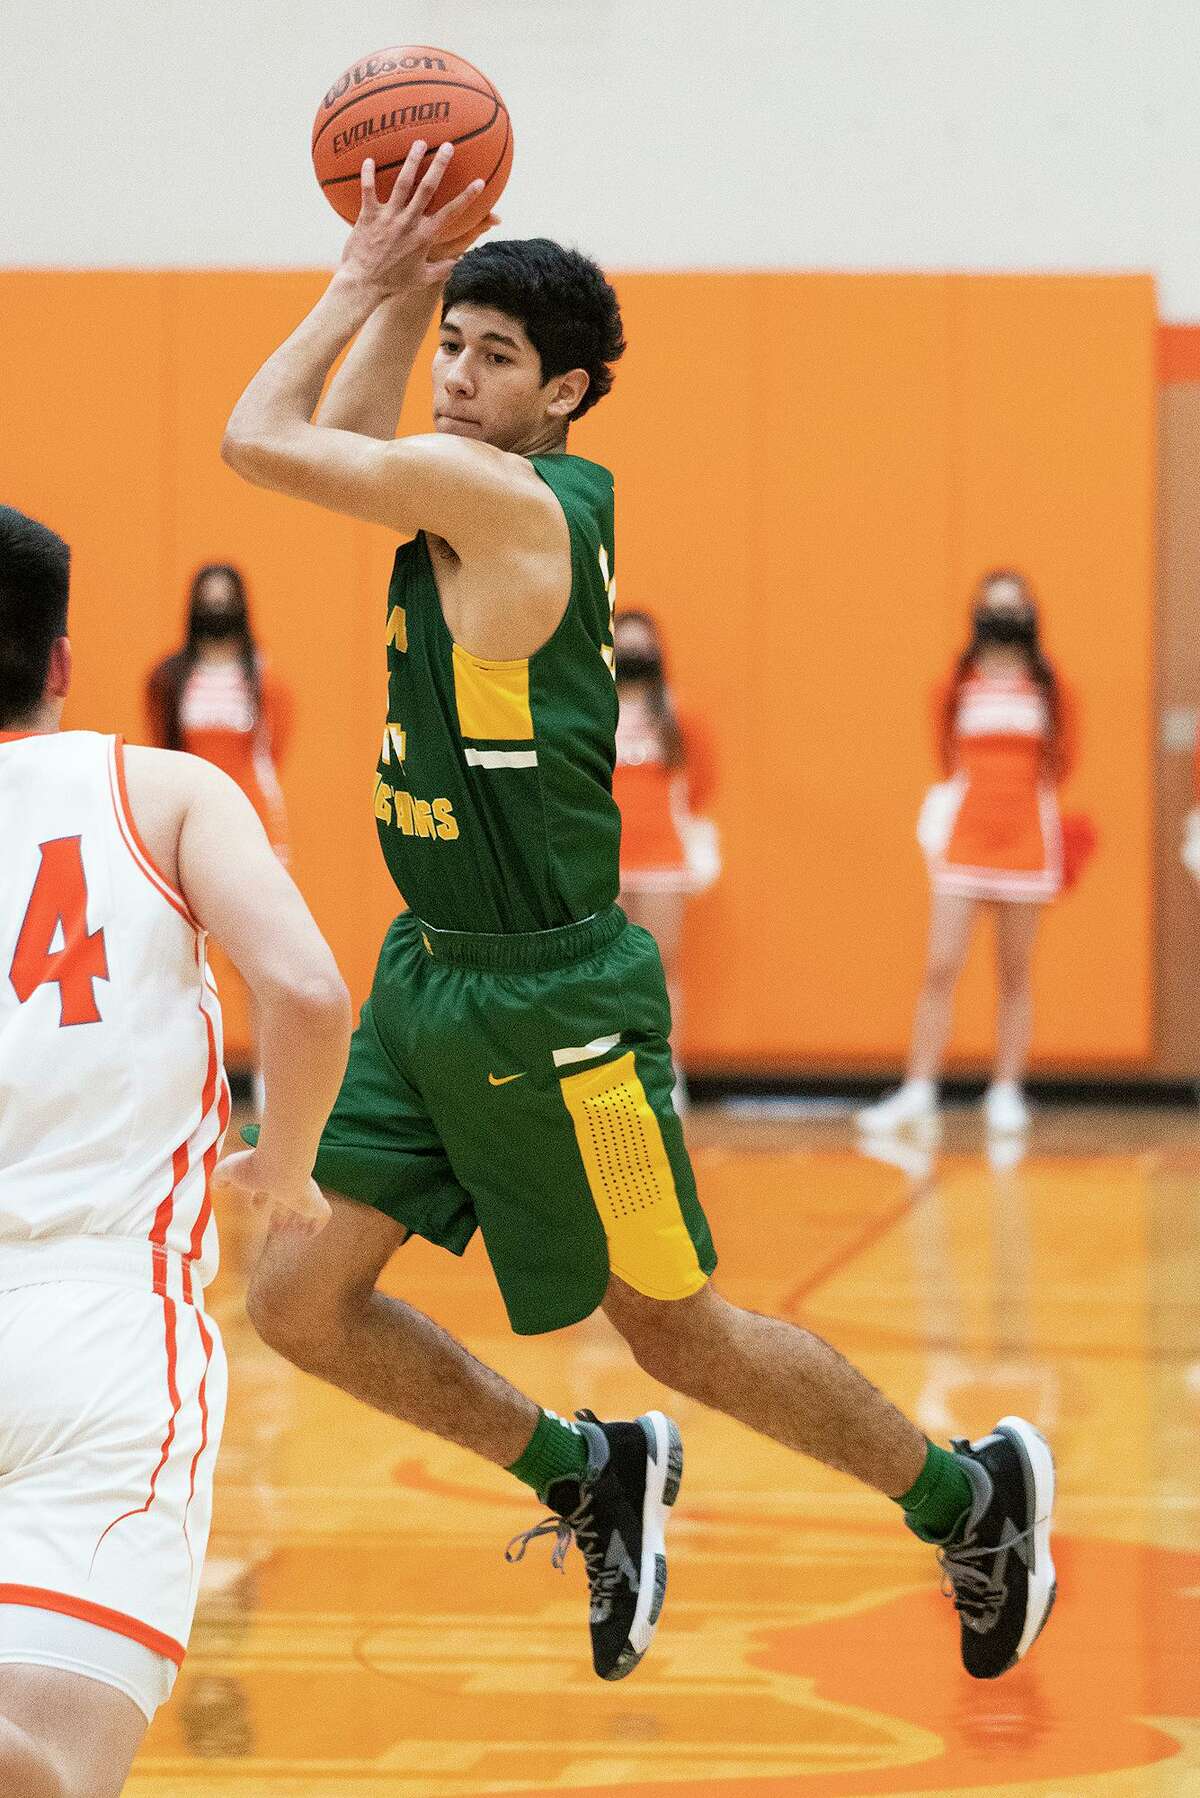 Ian Tovar receives a pass during a game against United High School Tuesday, Jan. 11, 2022.